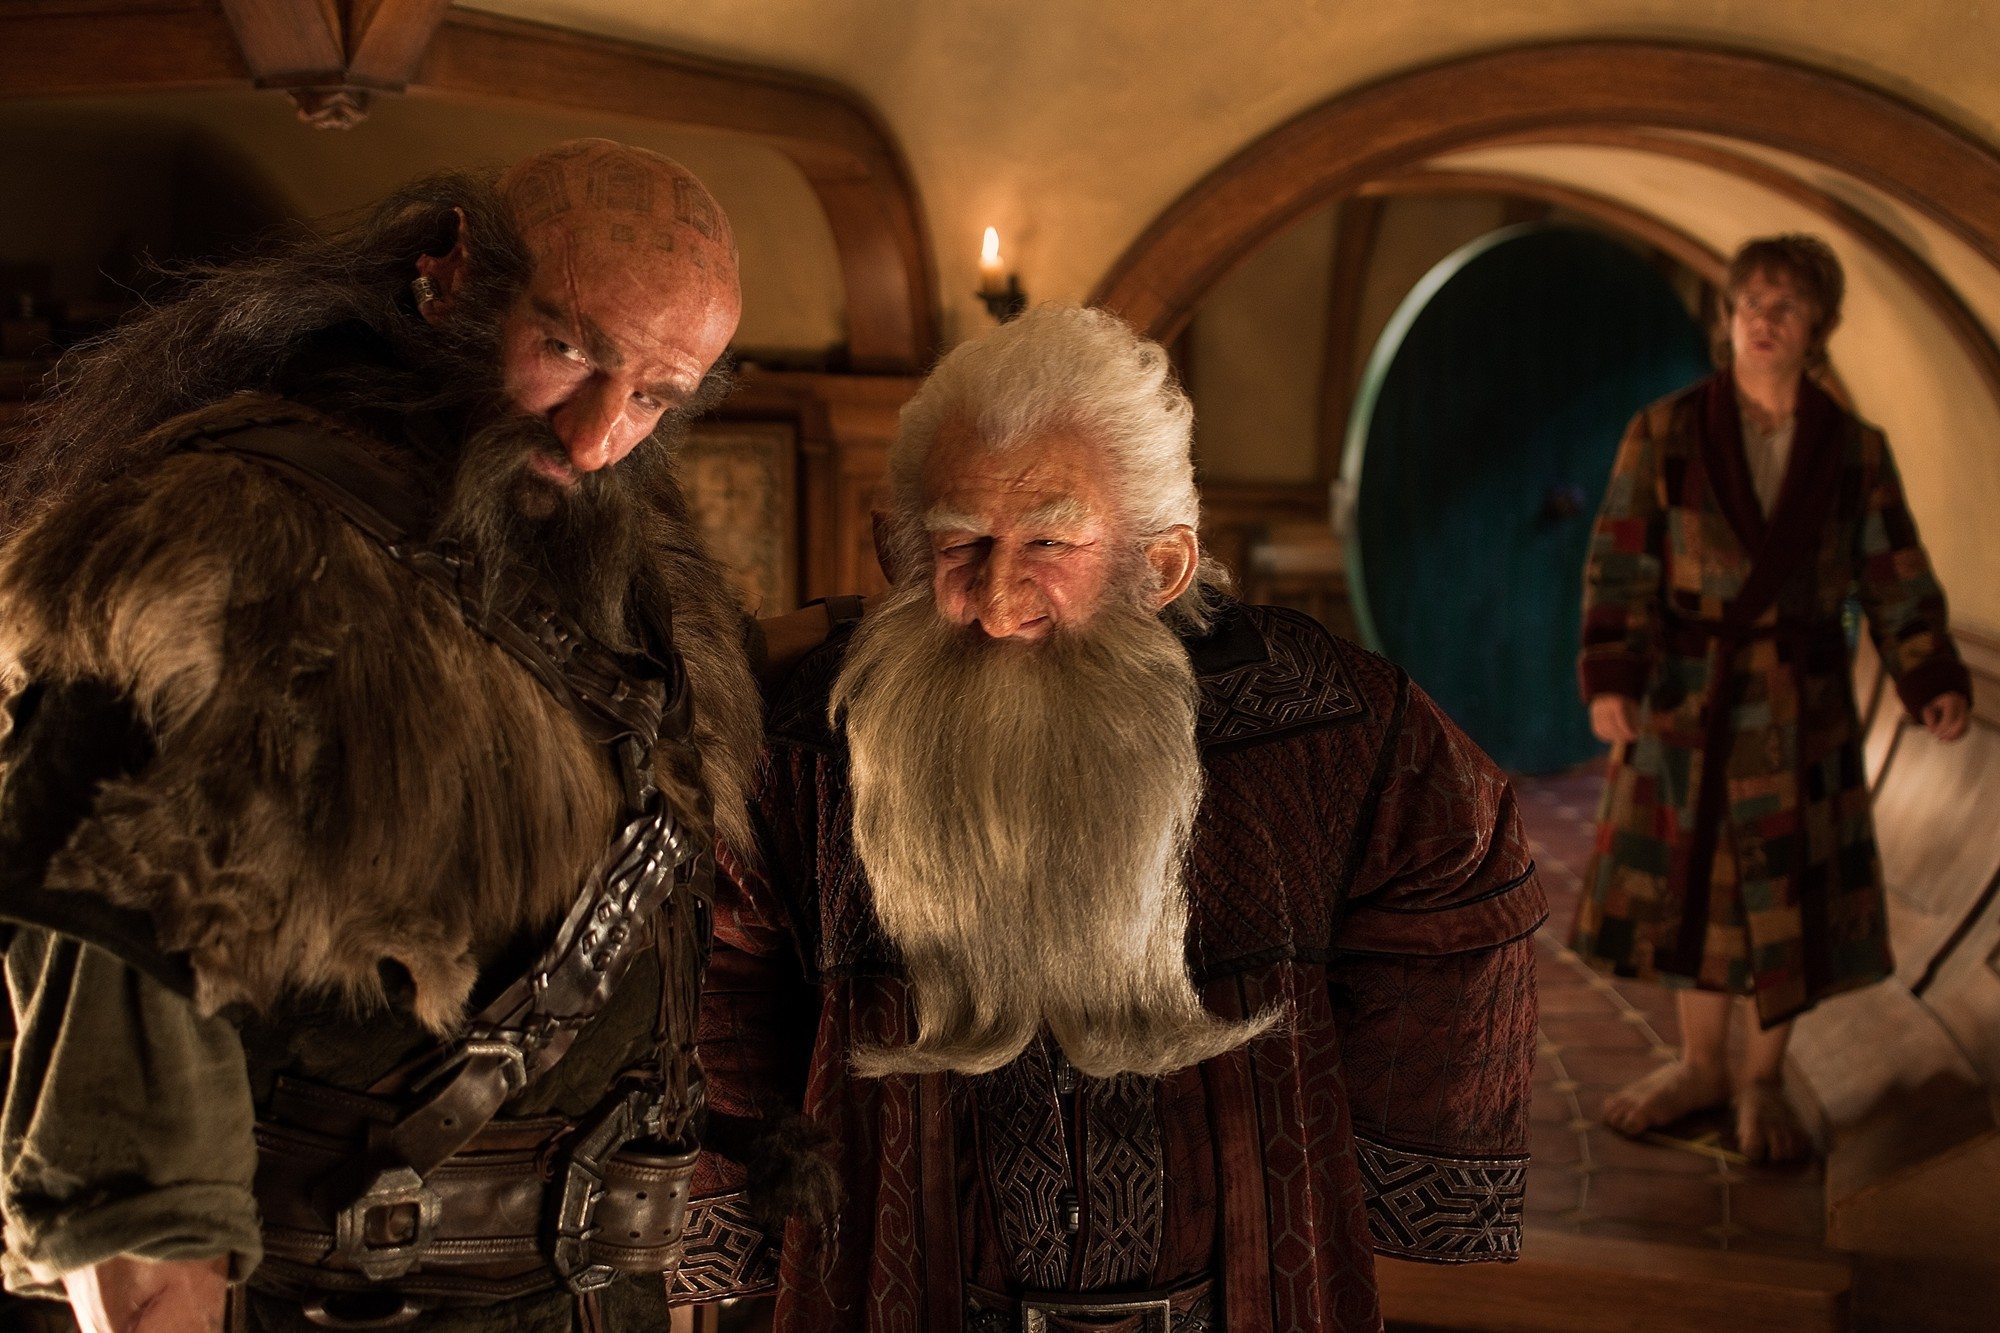 free download The Hobbit: An Unexpected Journey